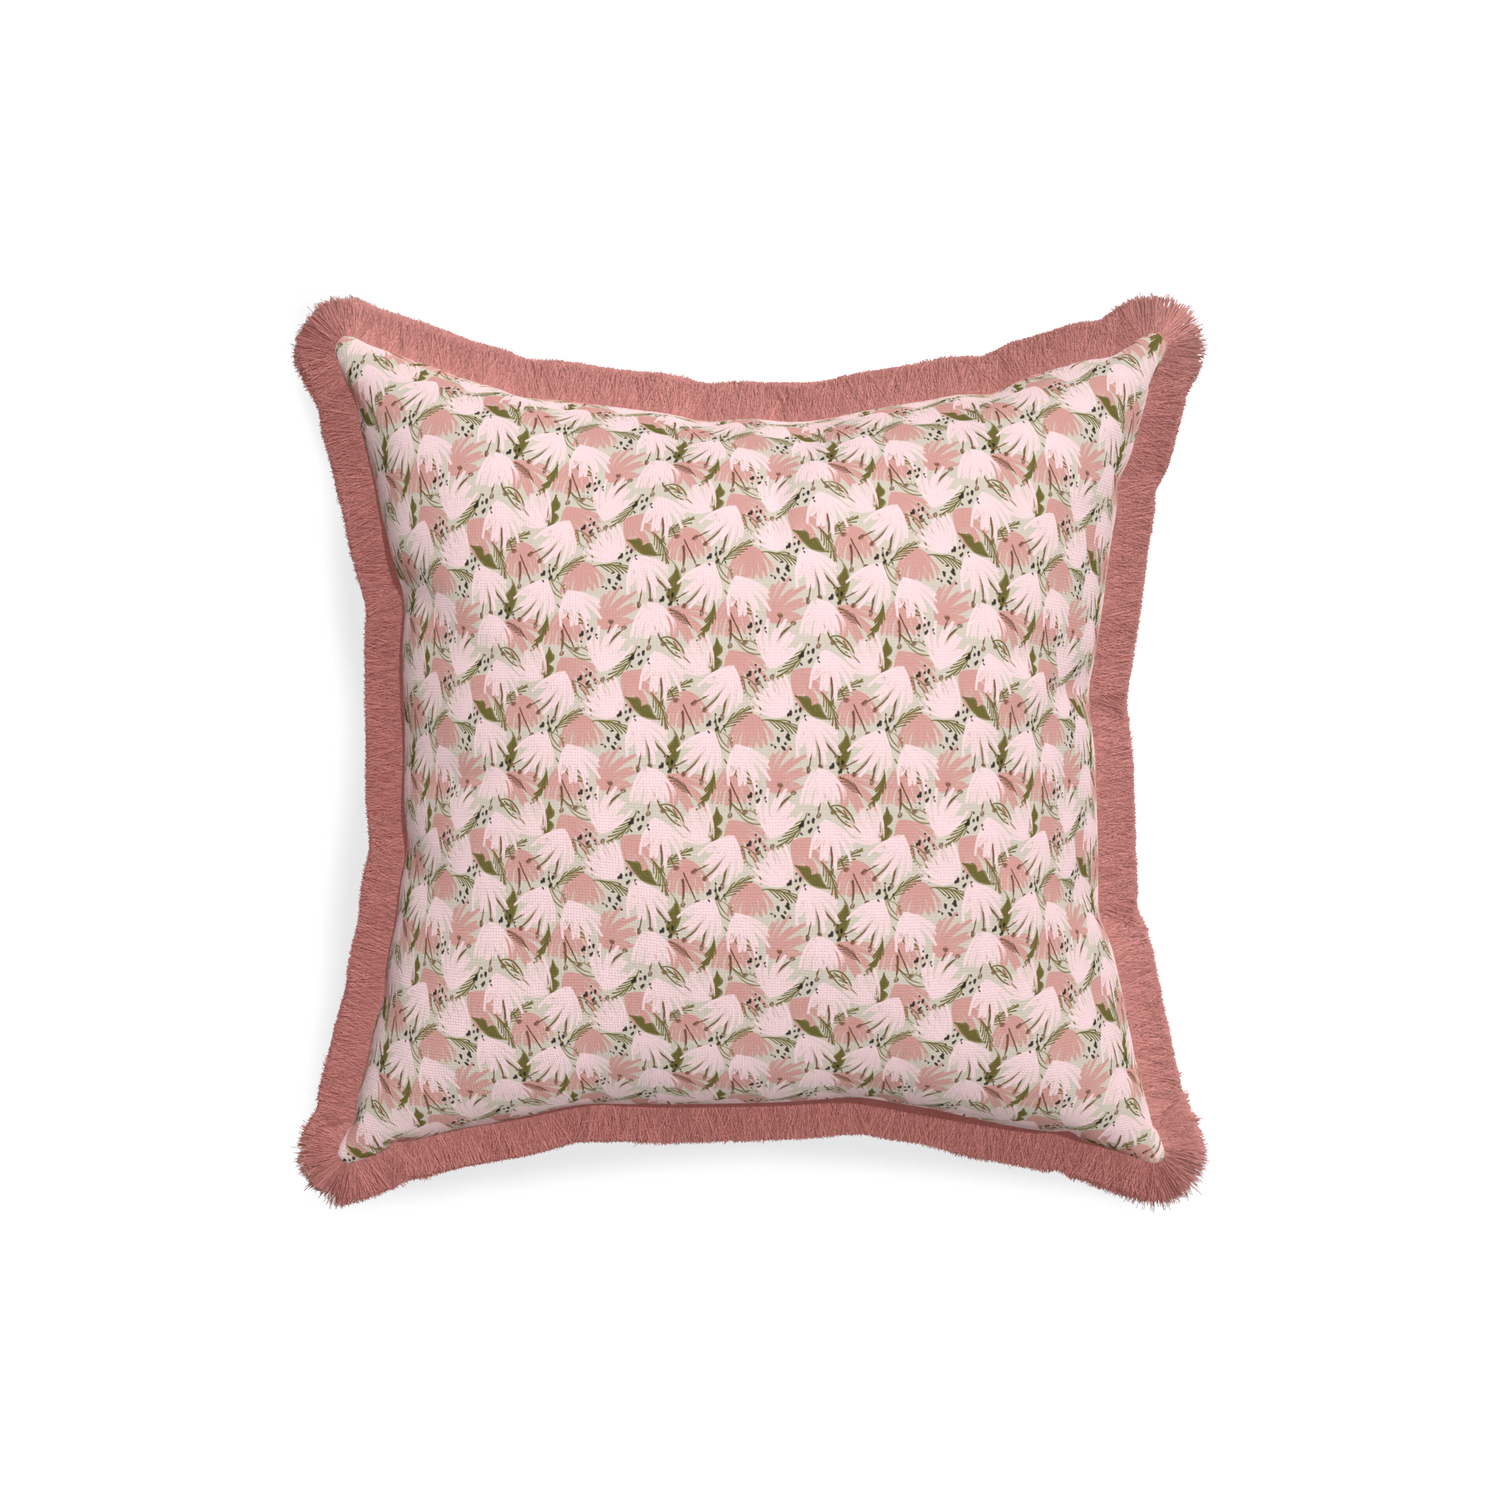 18-square eden pink custom pillow with d fringe on white background